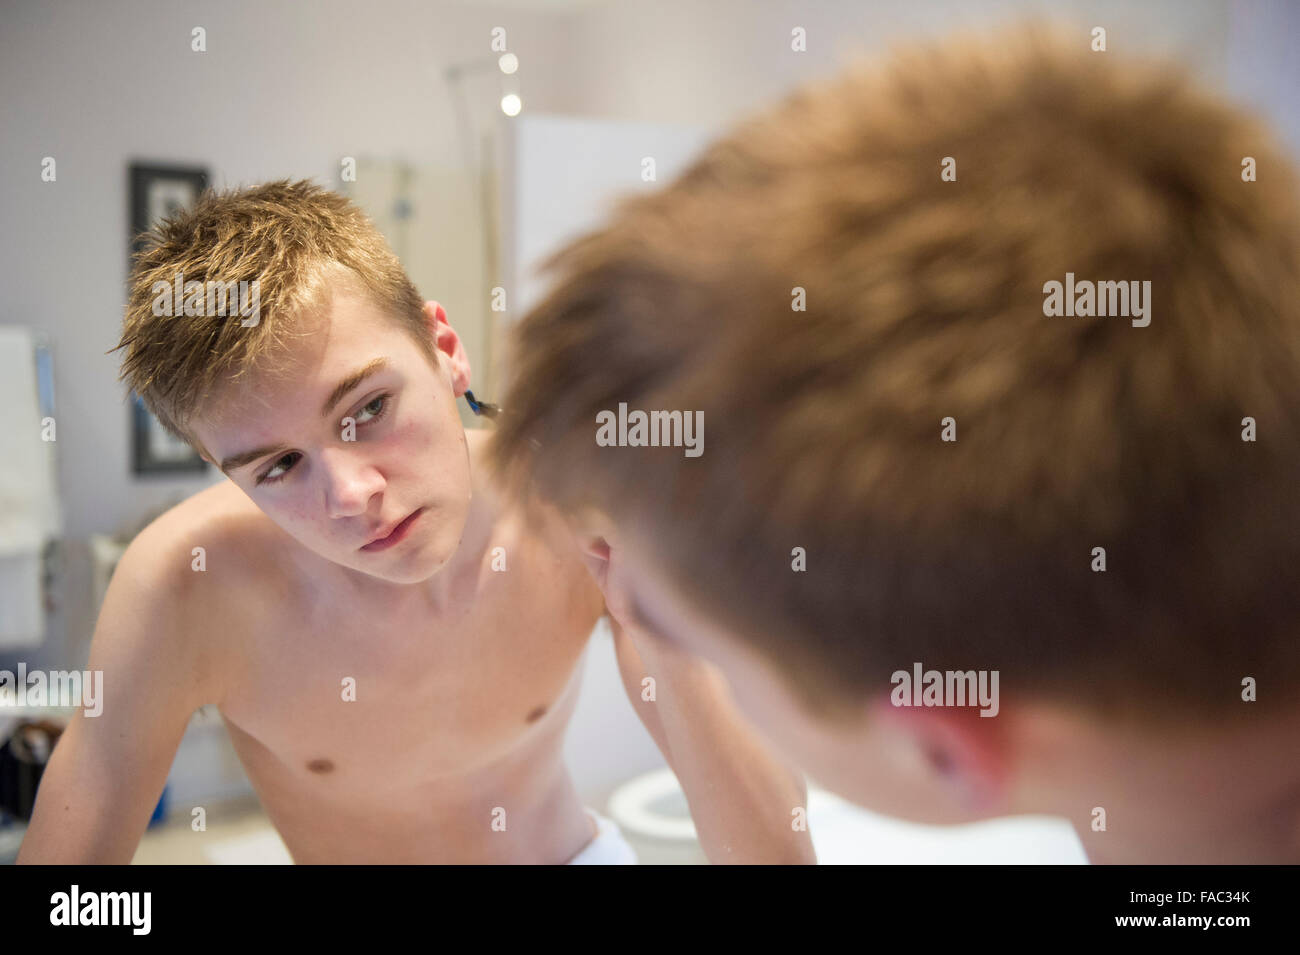 A shaves for the first time Stock Photo Alamy